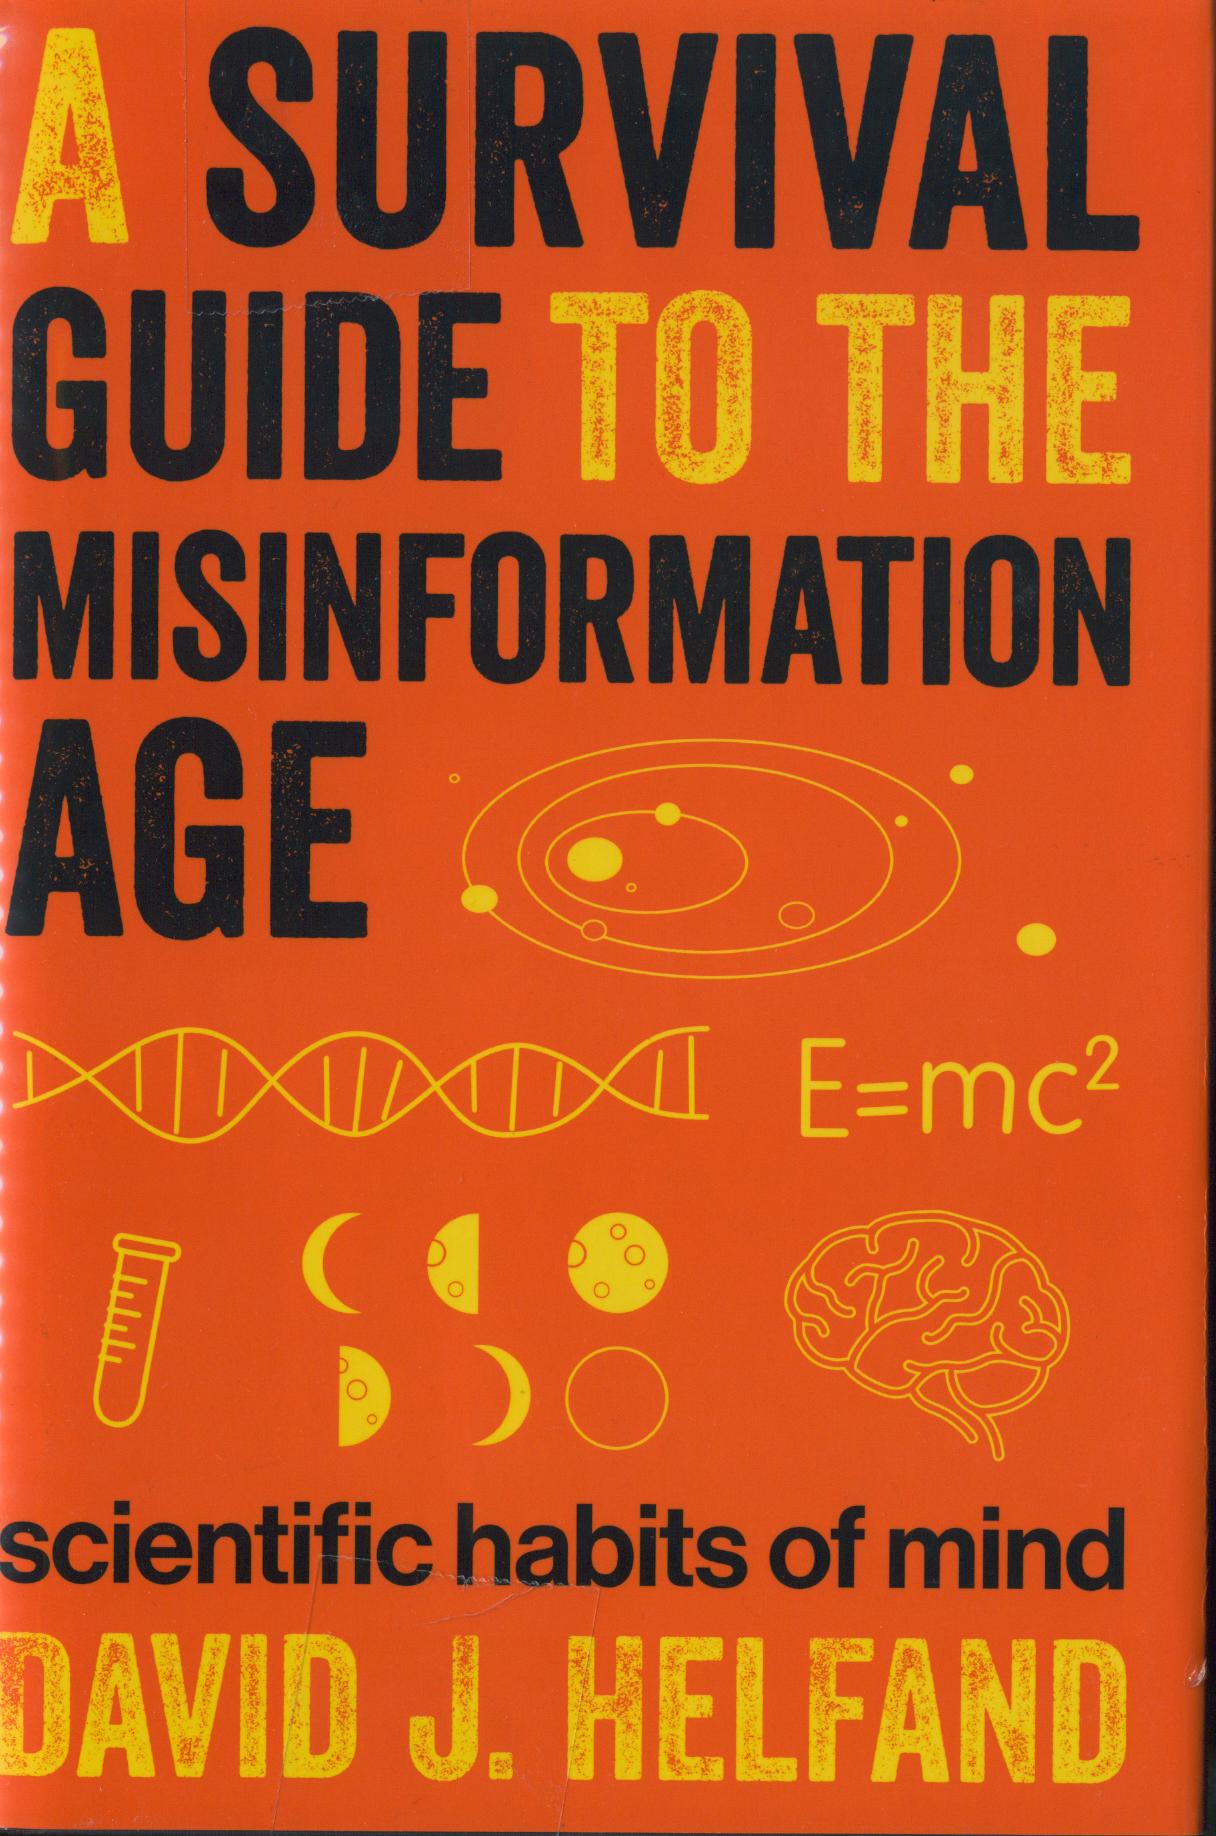 A Survival Guide to the Misinformation Age book jacket